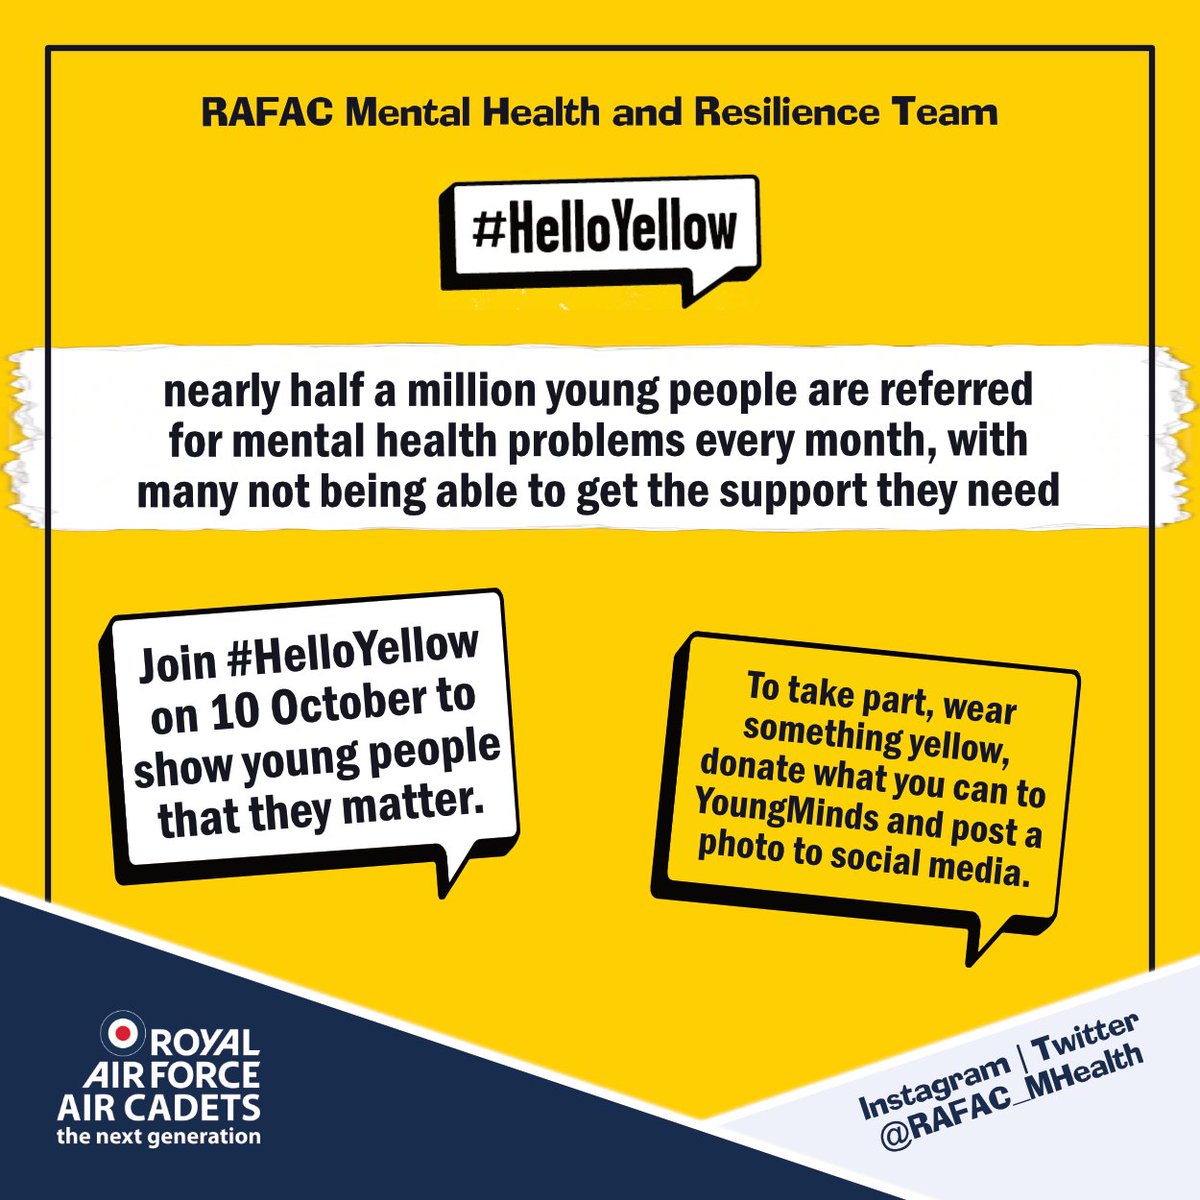 Tomorrow is #WorldMentalHealthDay and once again we're supporting @YoungMindsUK's #HelloYellow campaign! To take part: 🟡 Wear something yellow 💷 Donate whay you can to YoungMinds 📸 Post a photo to social media - tagging @YoungMindsUK, @RAFAC_MHealth and @aircadets.